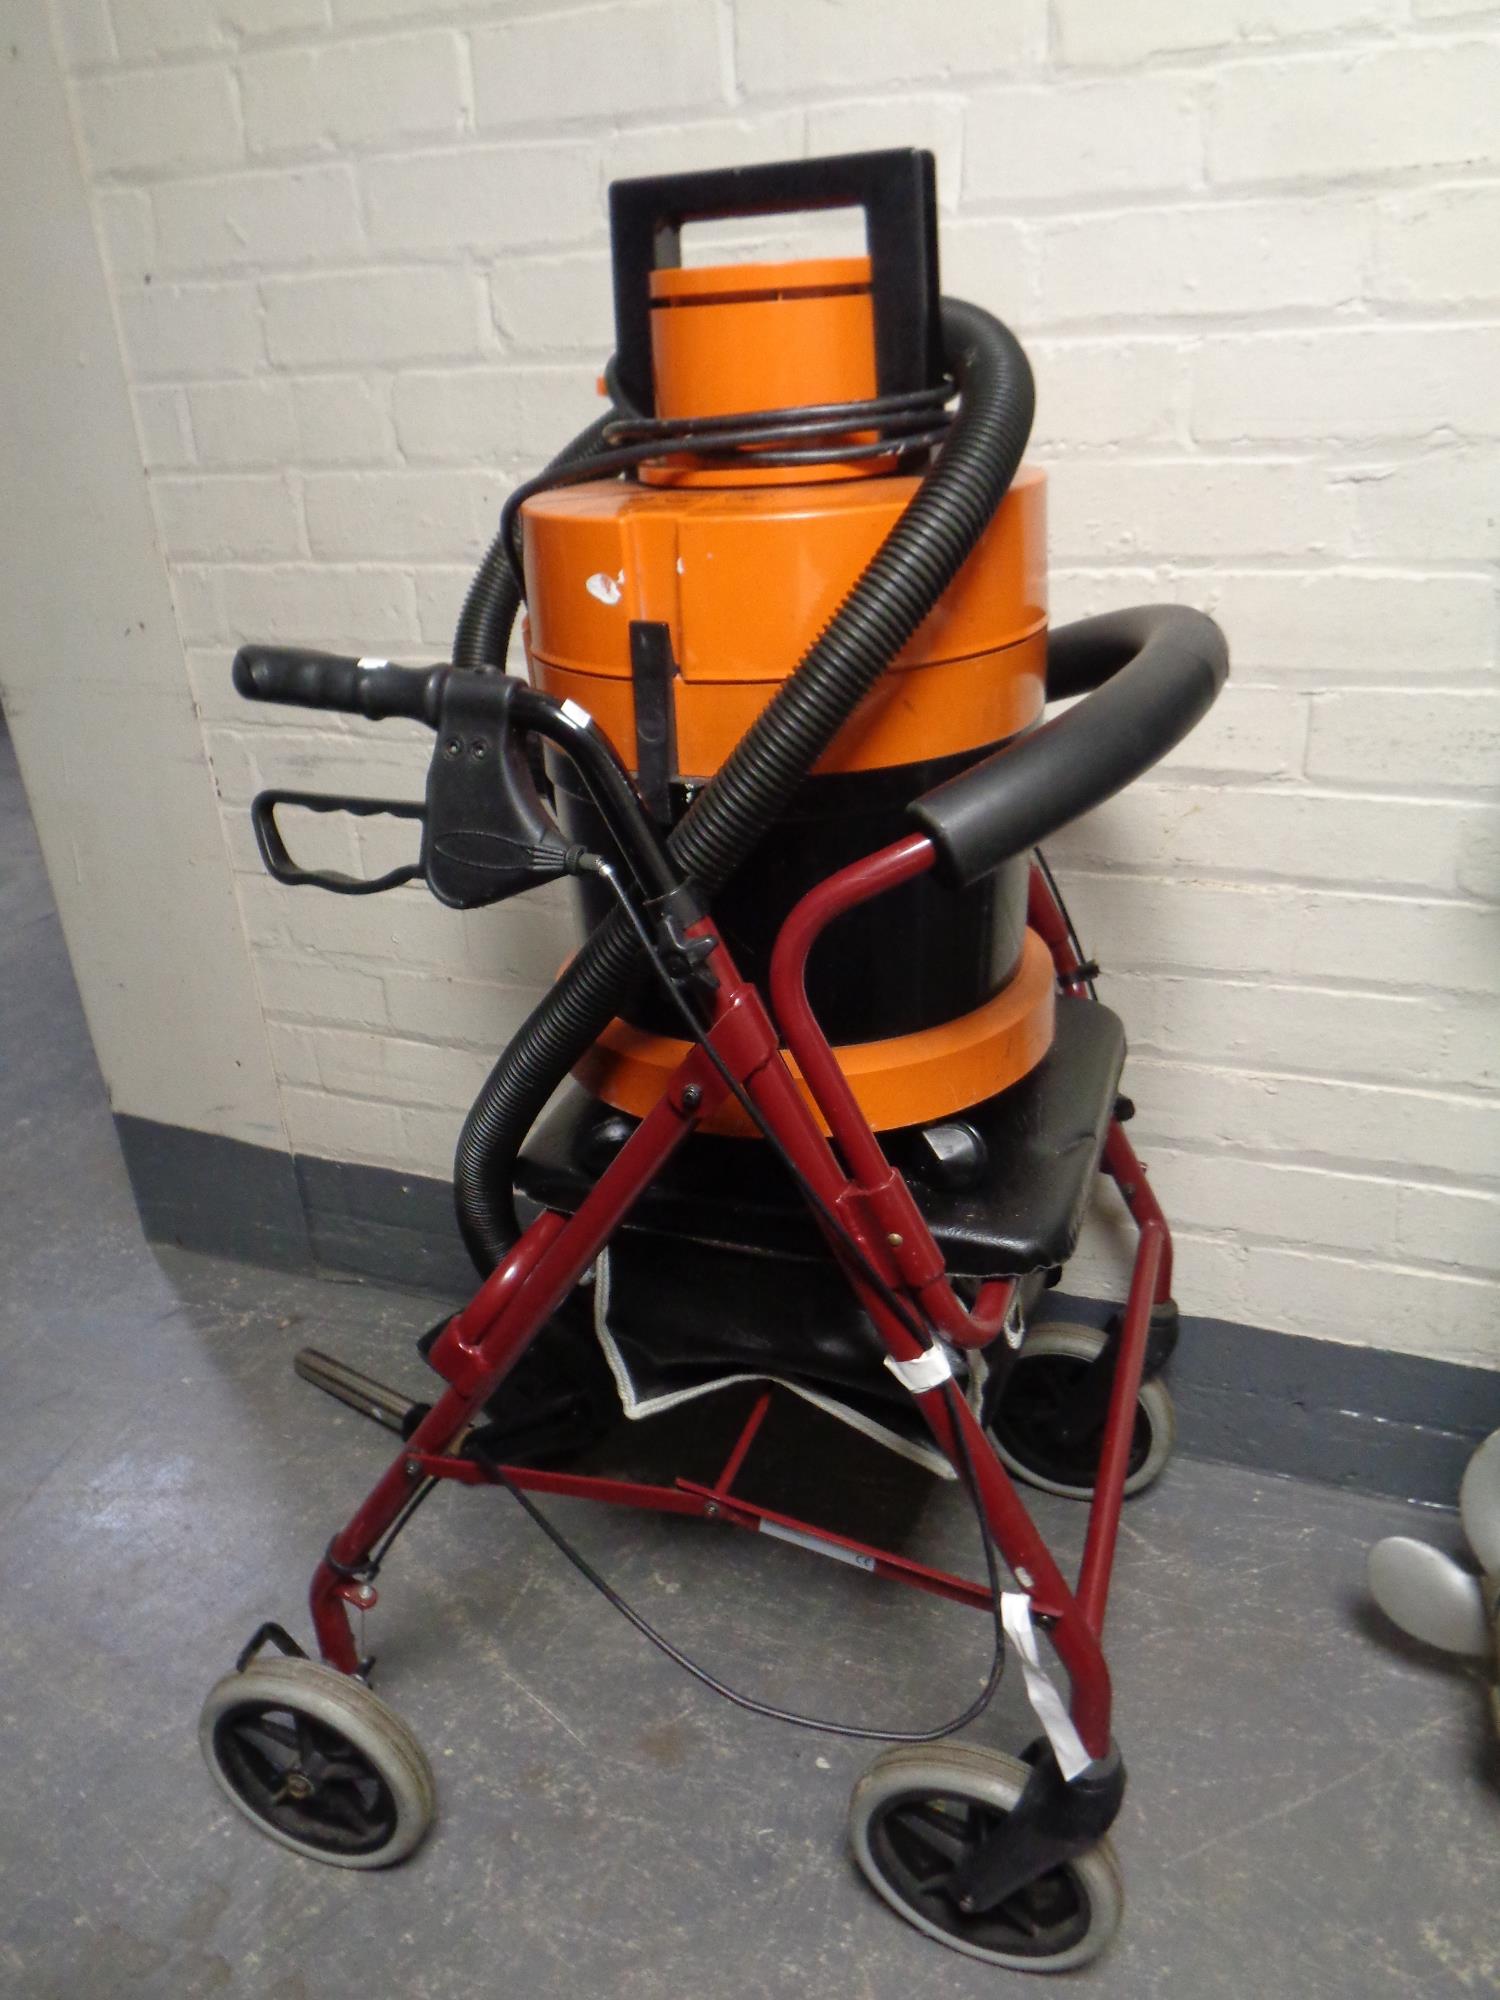 A disability walking aid together with a cylinder Vax and a Vax steam cleaner